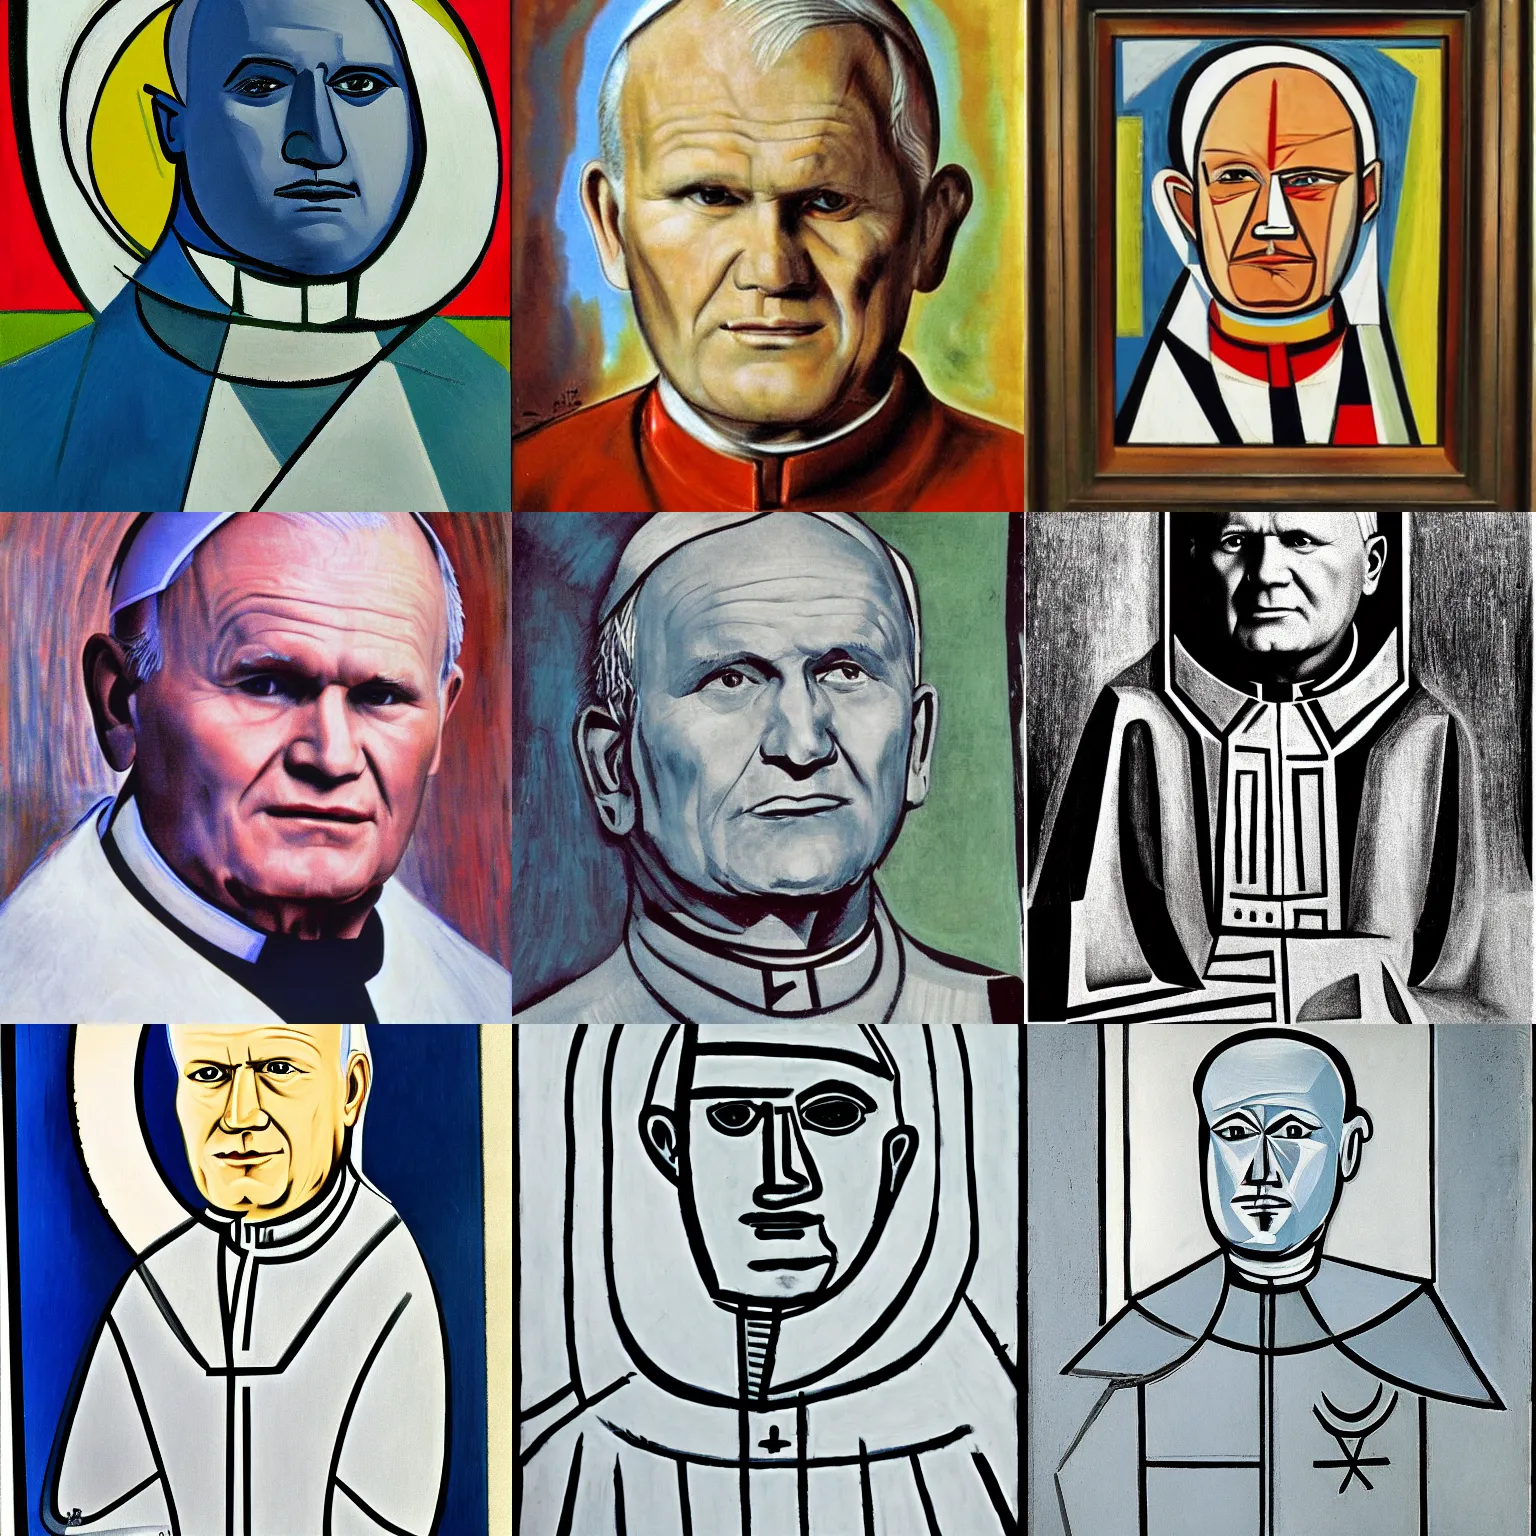 Prompt: John Paul II portrait made by Pablo Picasso